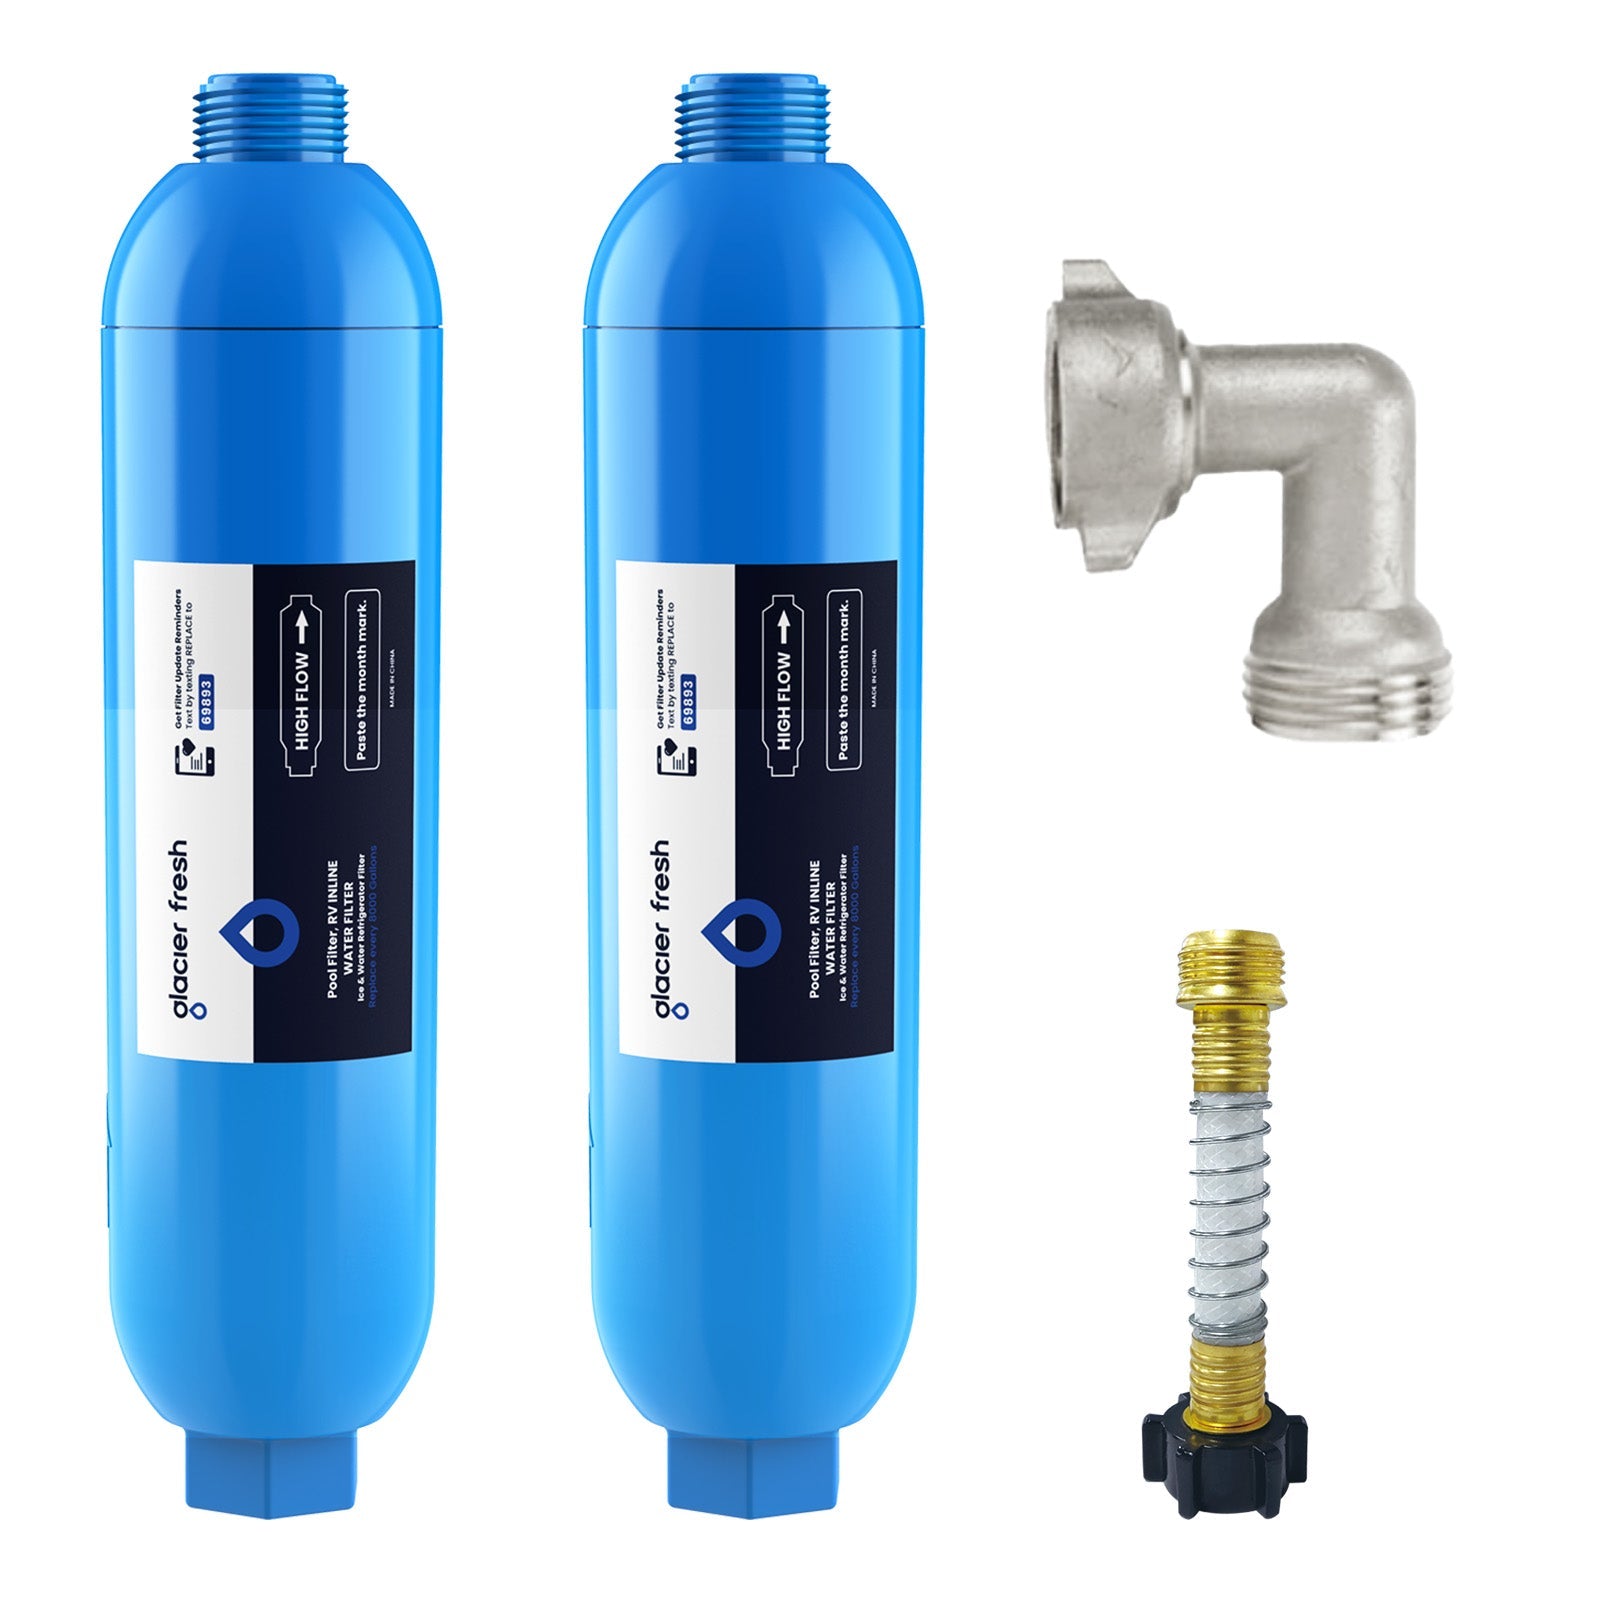 filtered. Inline Water Filter System For Refrigerator And Ice